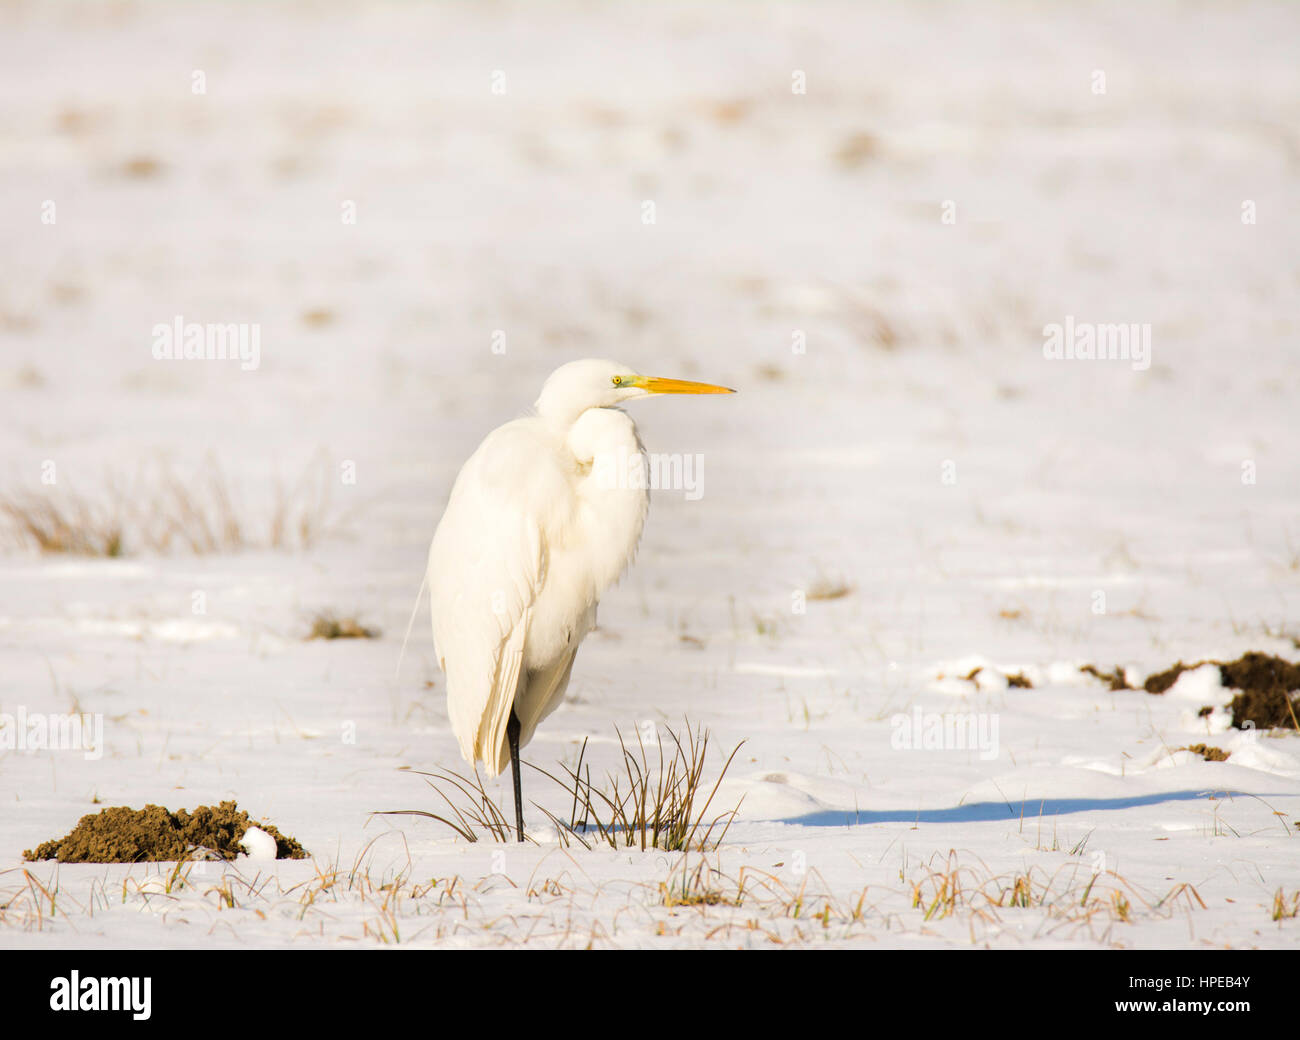 White great egret (Ardea alba) standing in a snow covered meadow Stock Photo